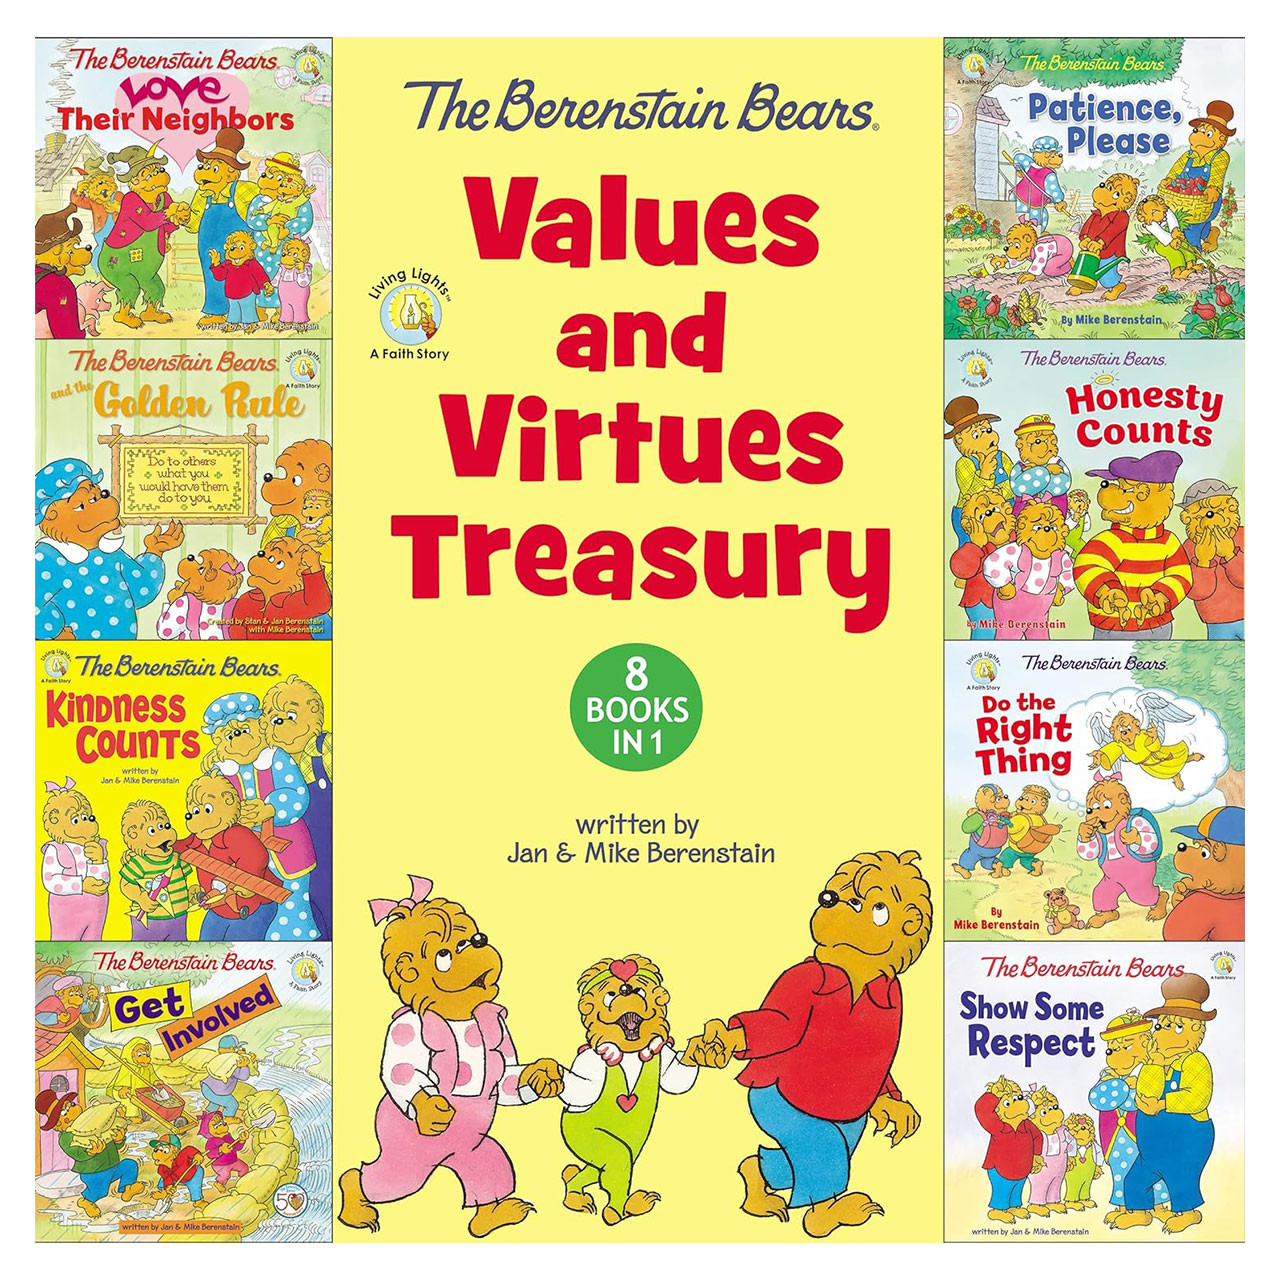 The Berenstain Bears: 8 Books in 1